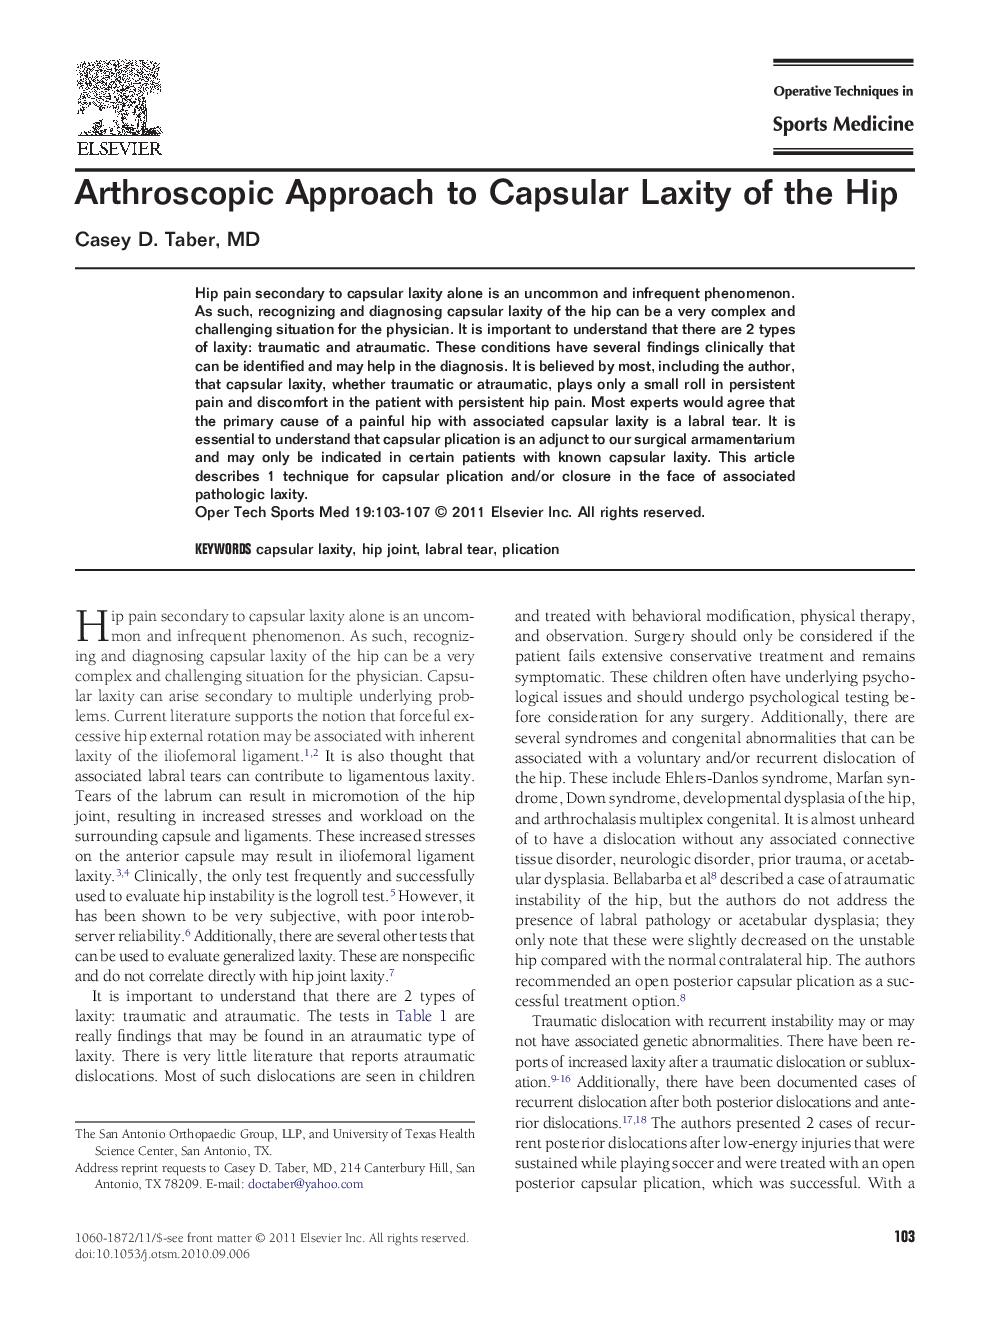 Arthroscopic Approach to Capsular Laxity of the Hip